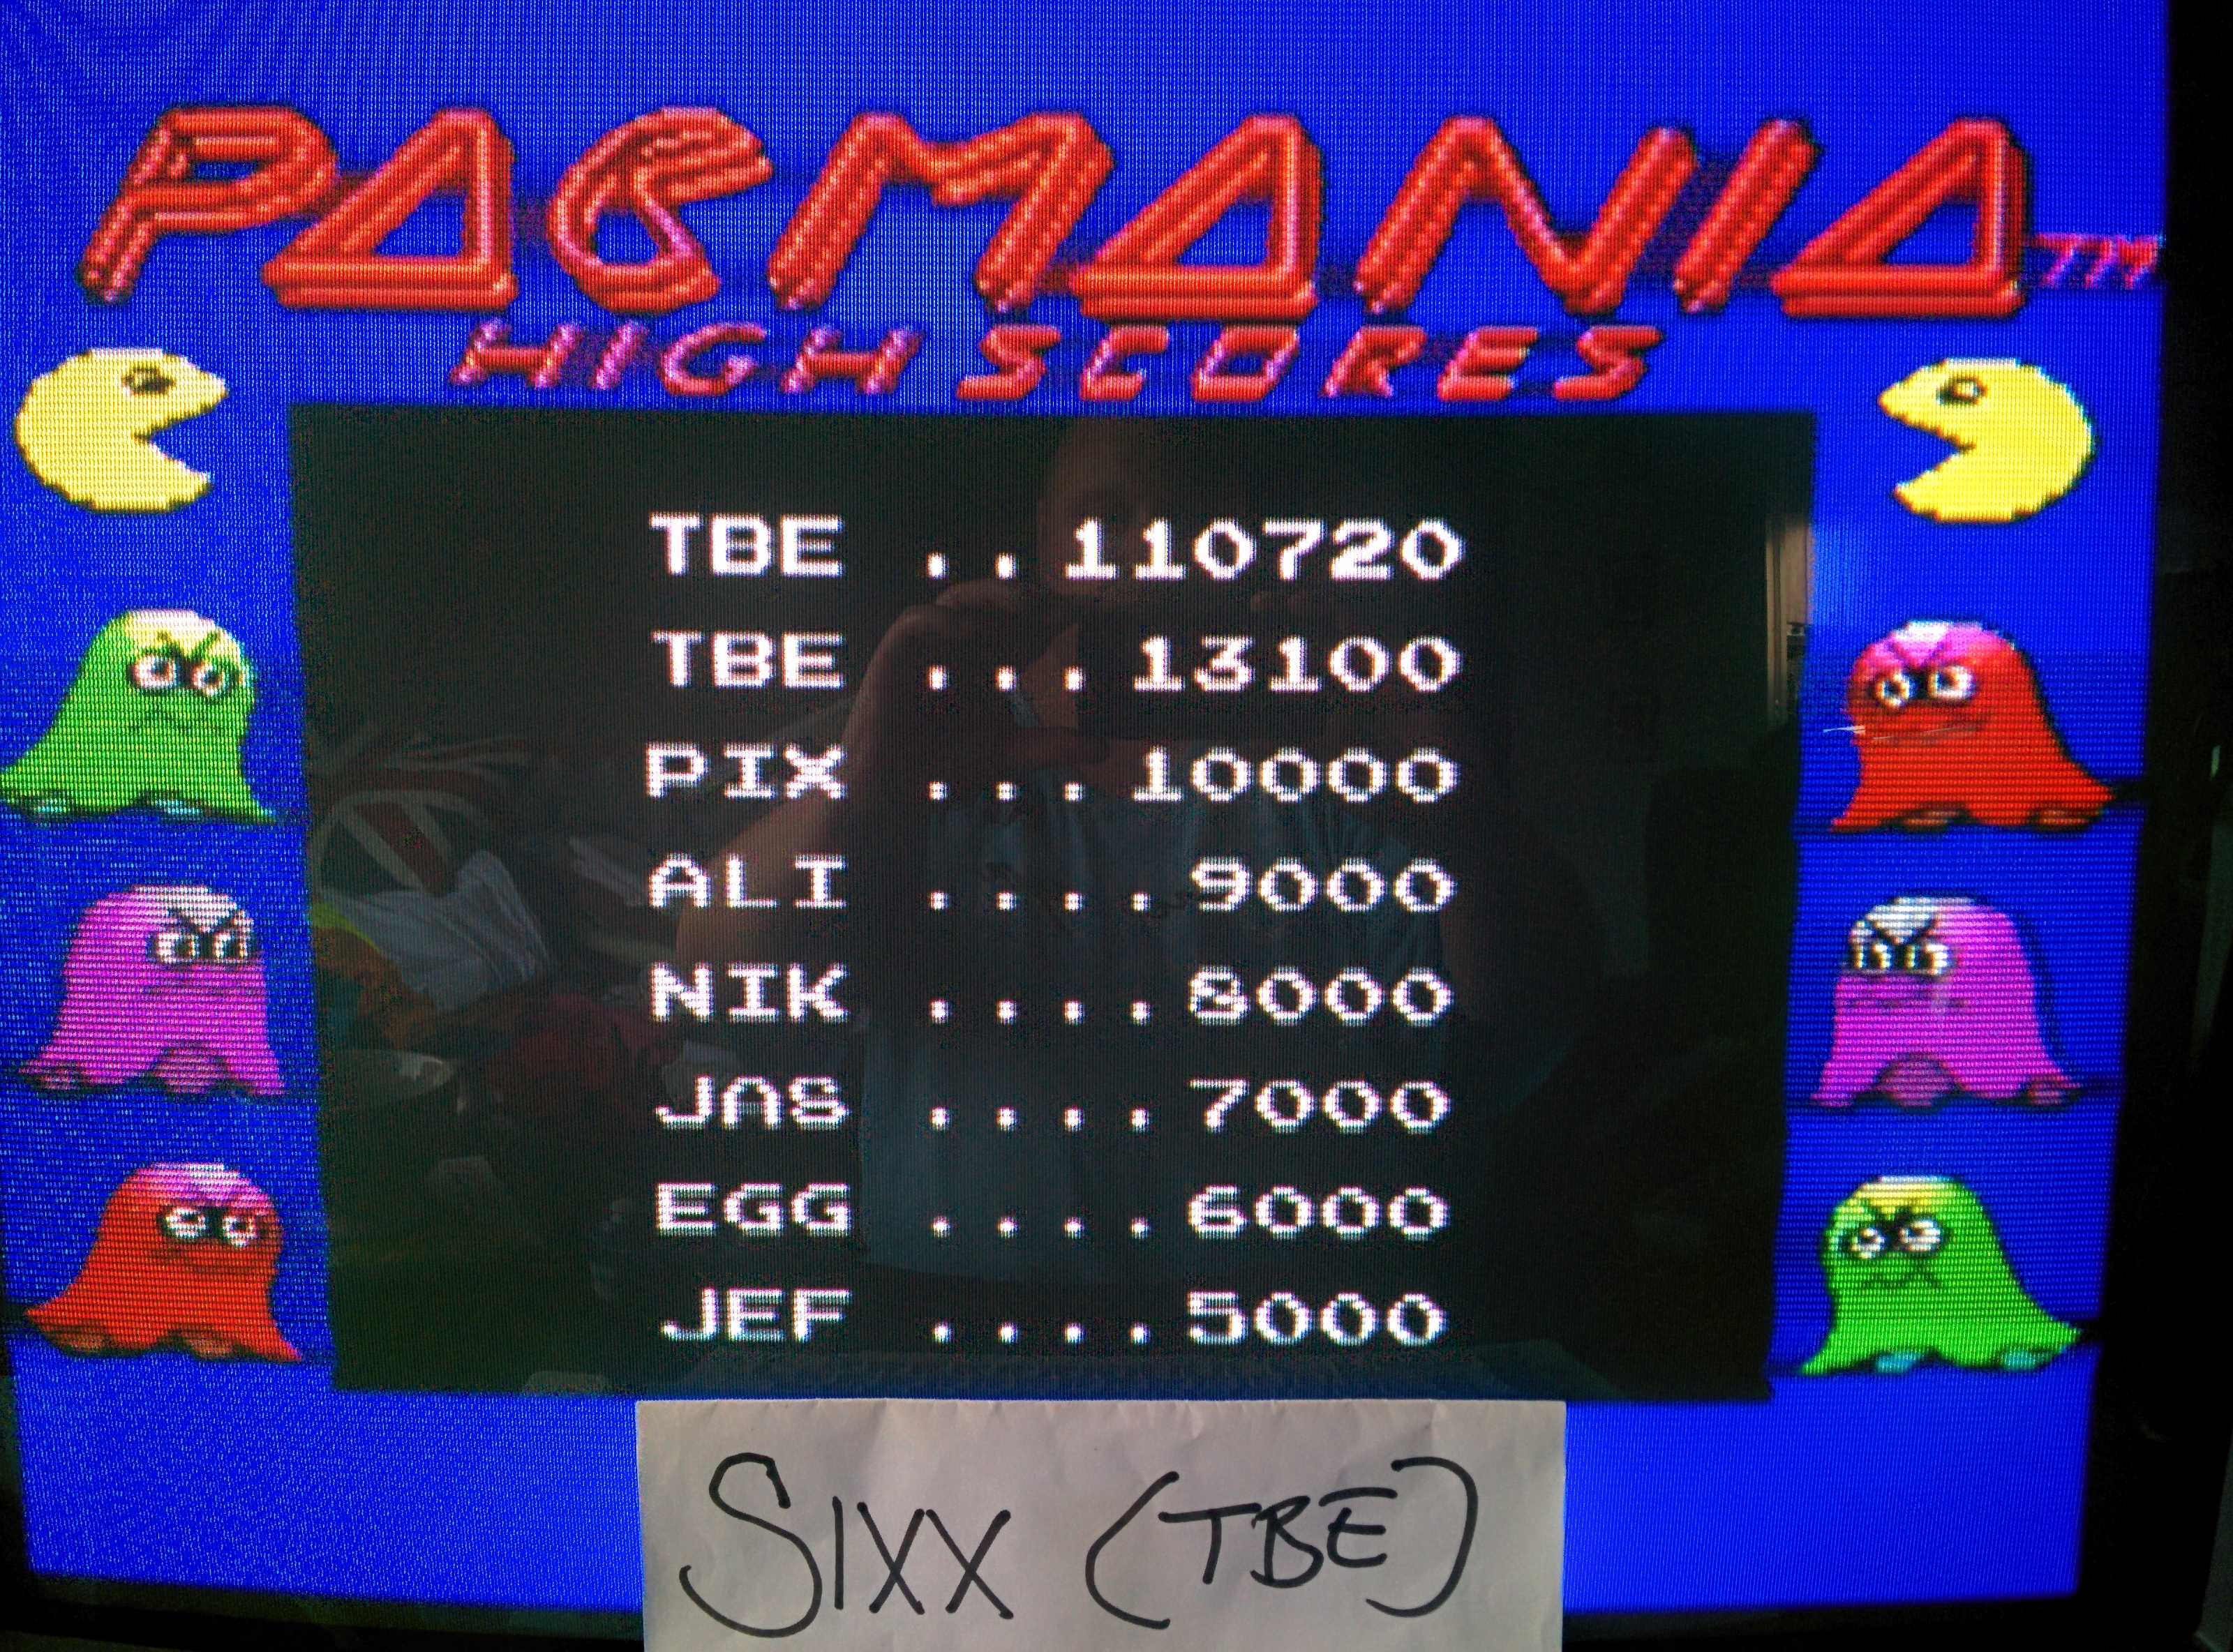 Sixx: Pac-Mania (Sega Master System Emulated) 110,720 points on 2014-07-10 13:32:56